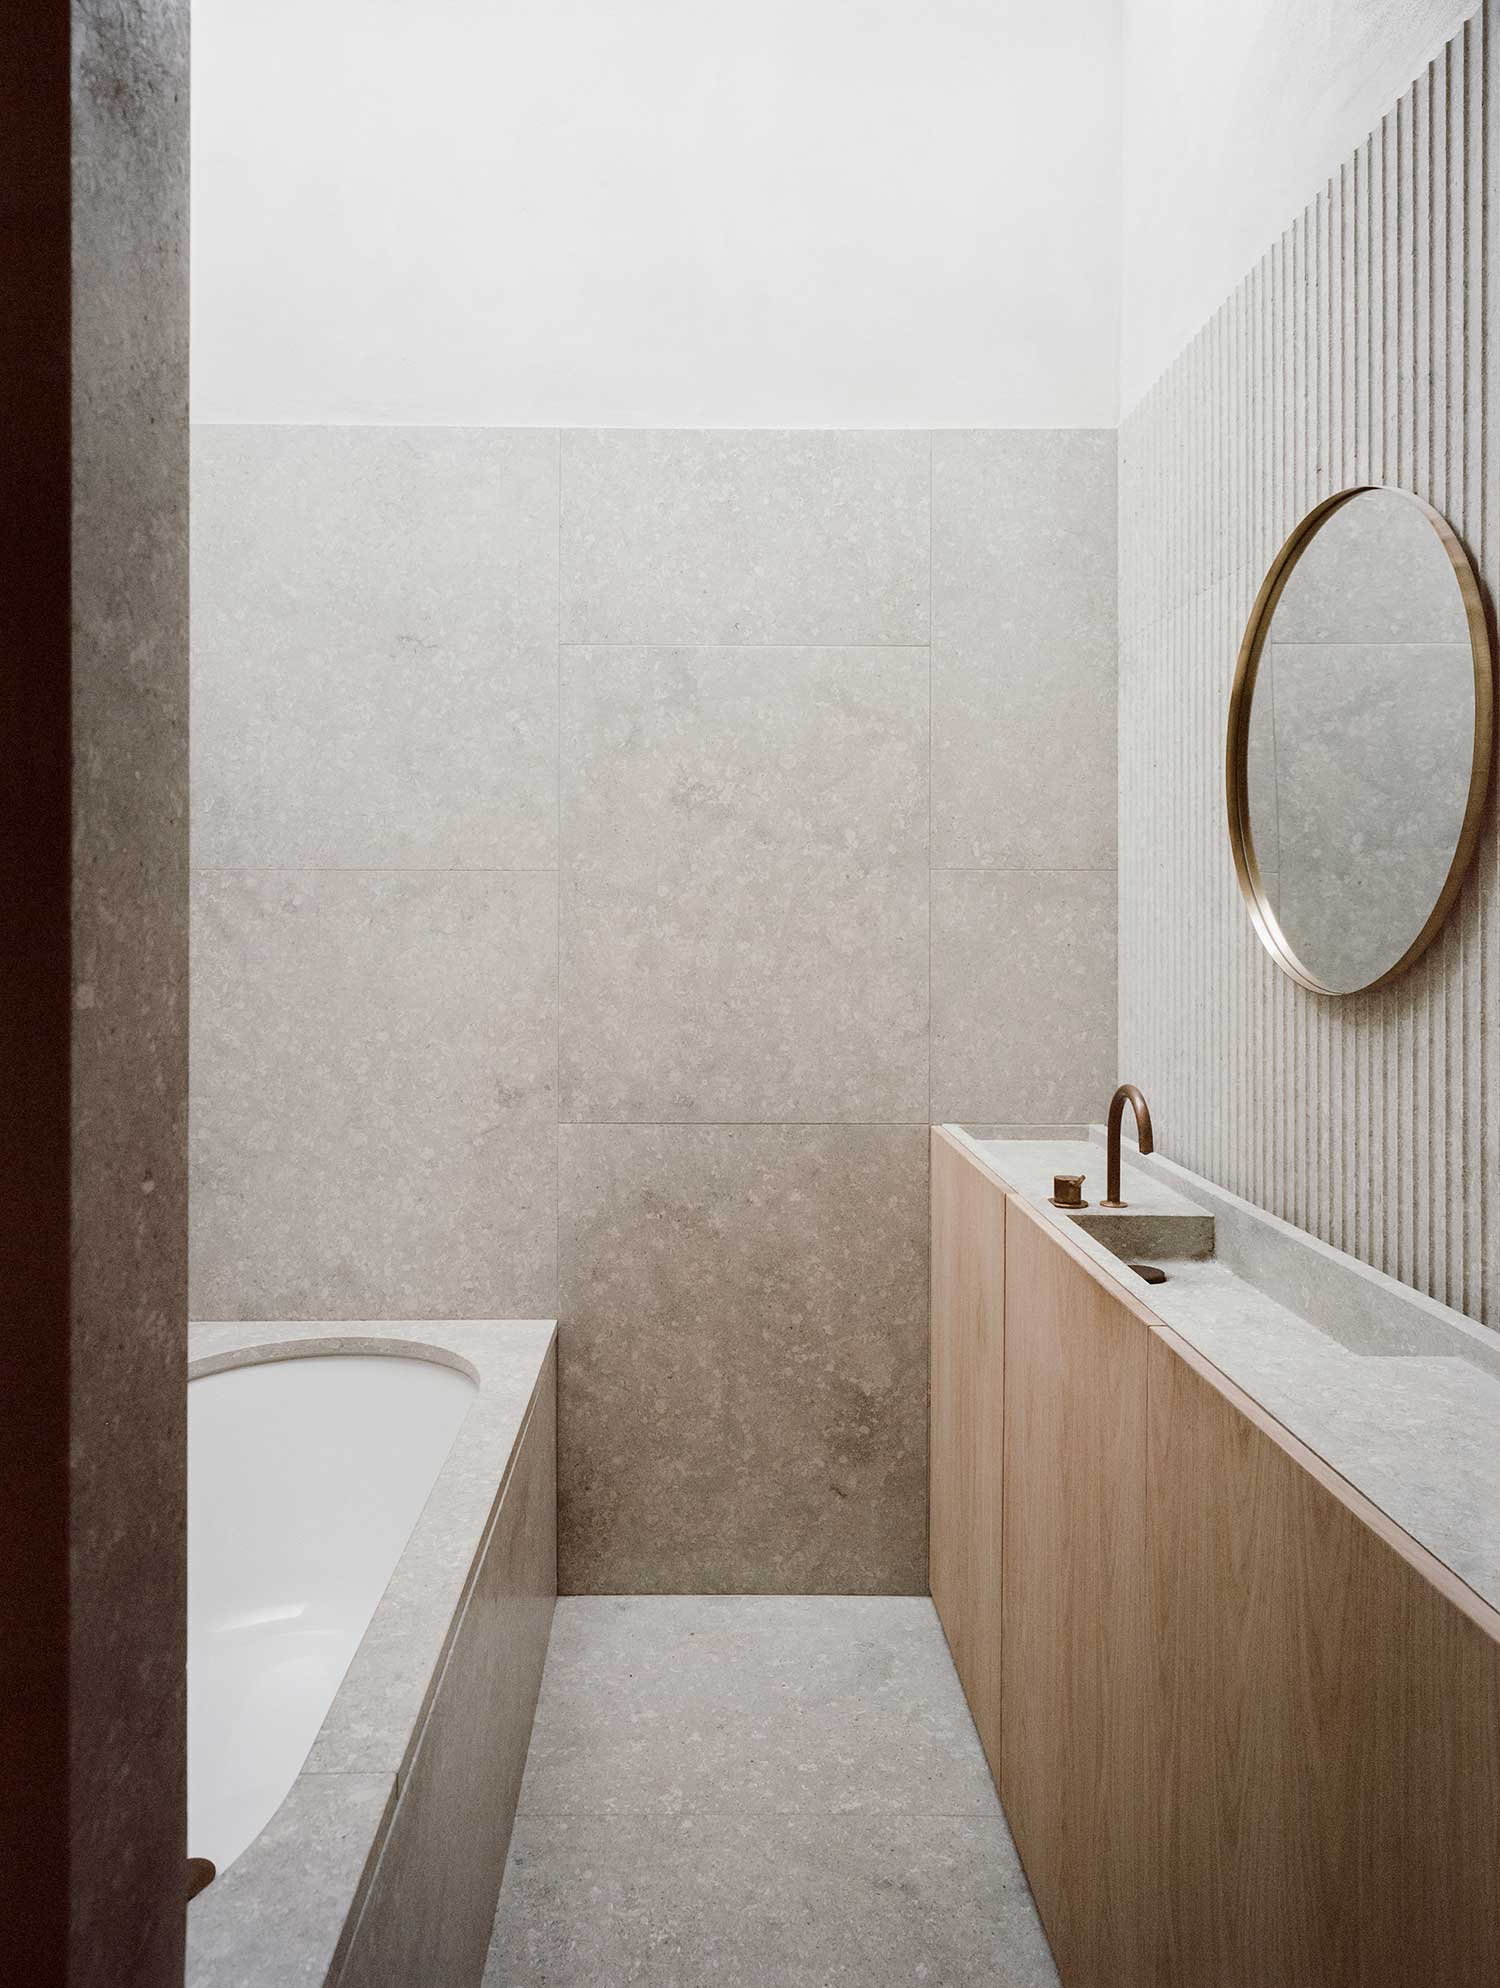 Bathroom lined with natural stone